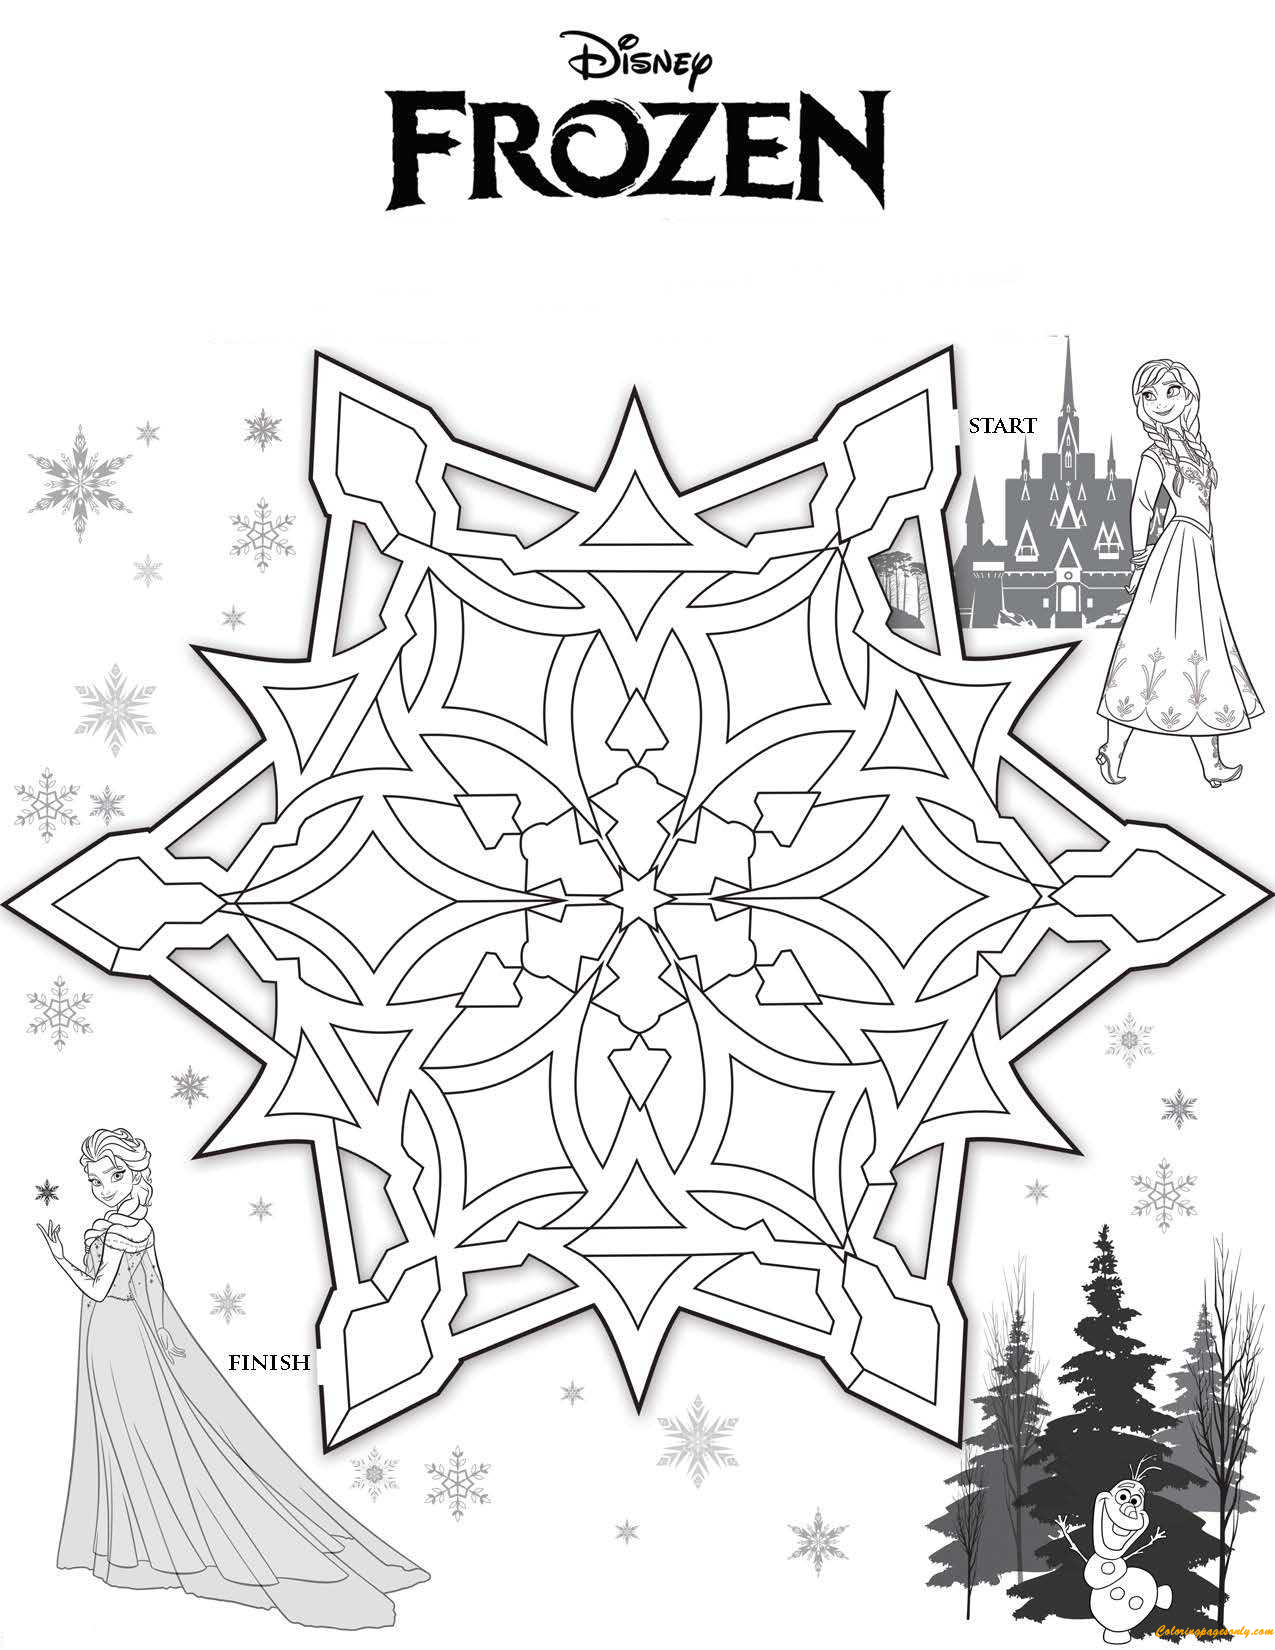 Frozen Playing Games Coloring Page - Free Coloring Pages Online